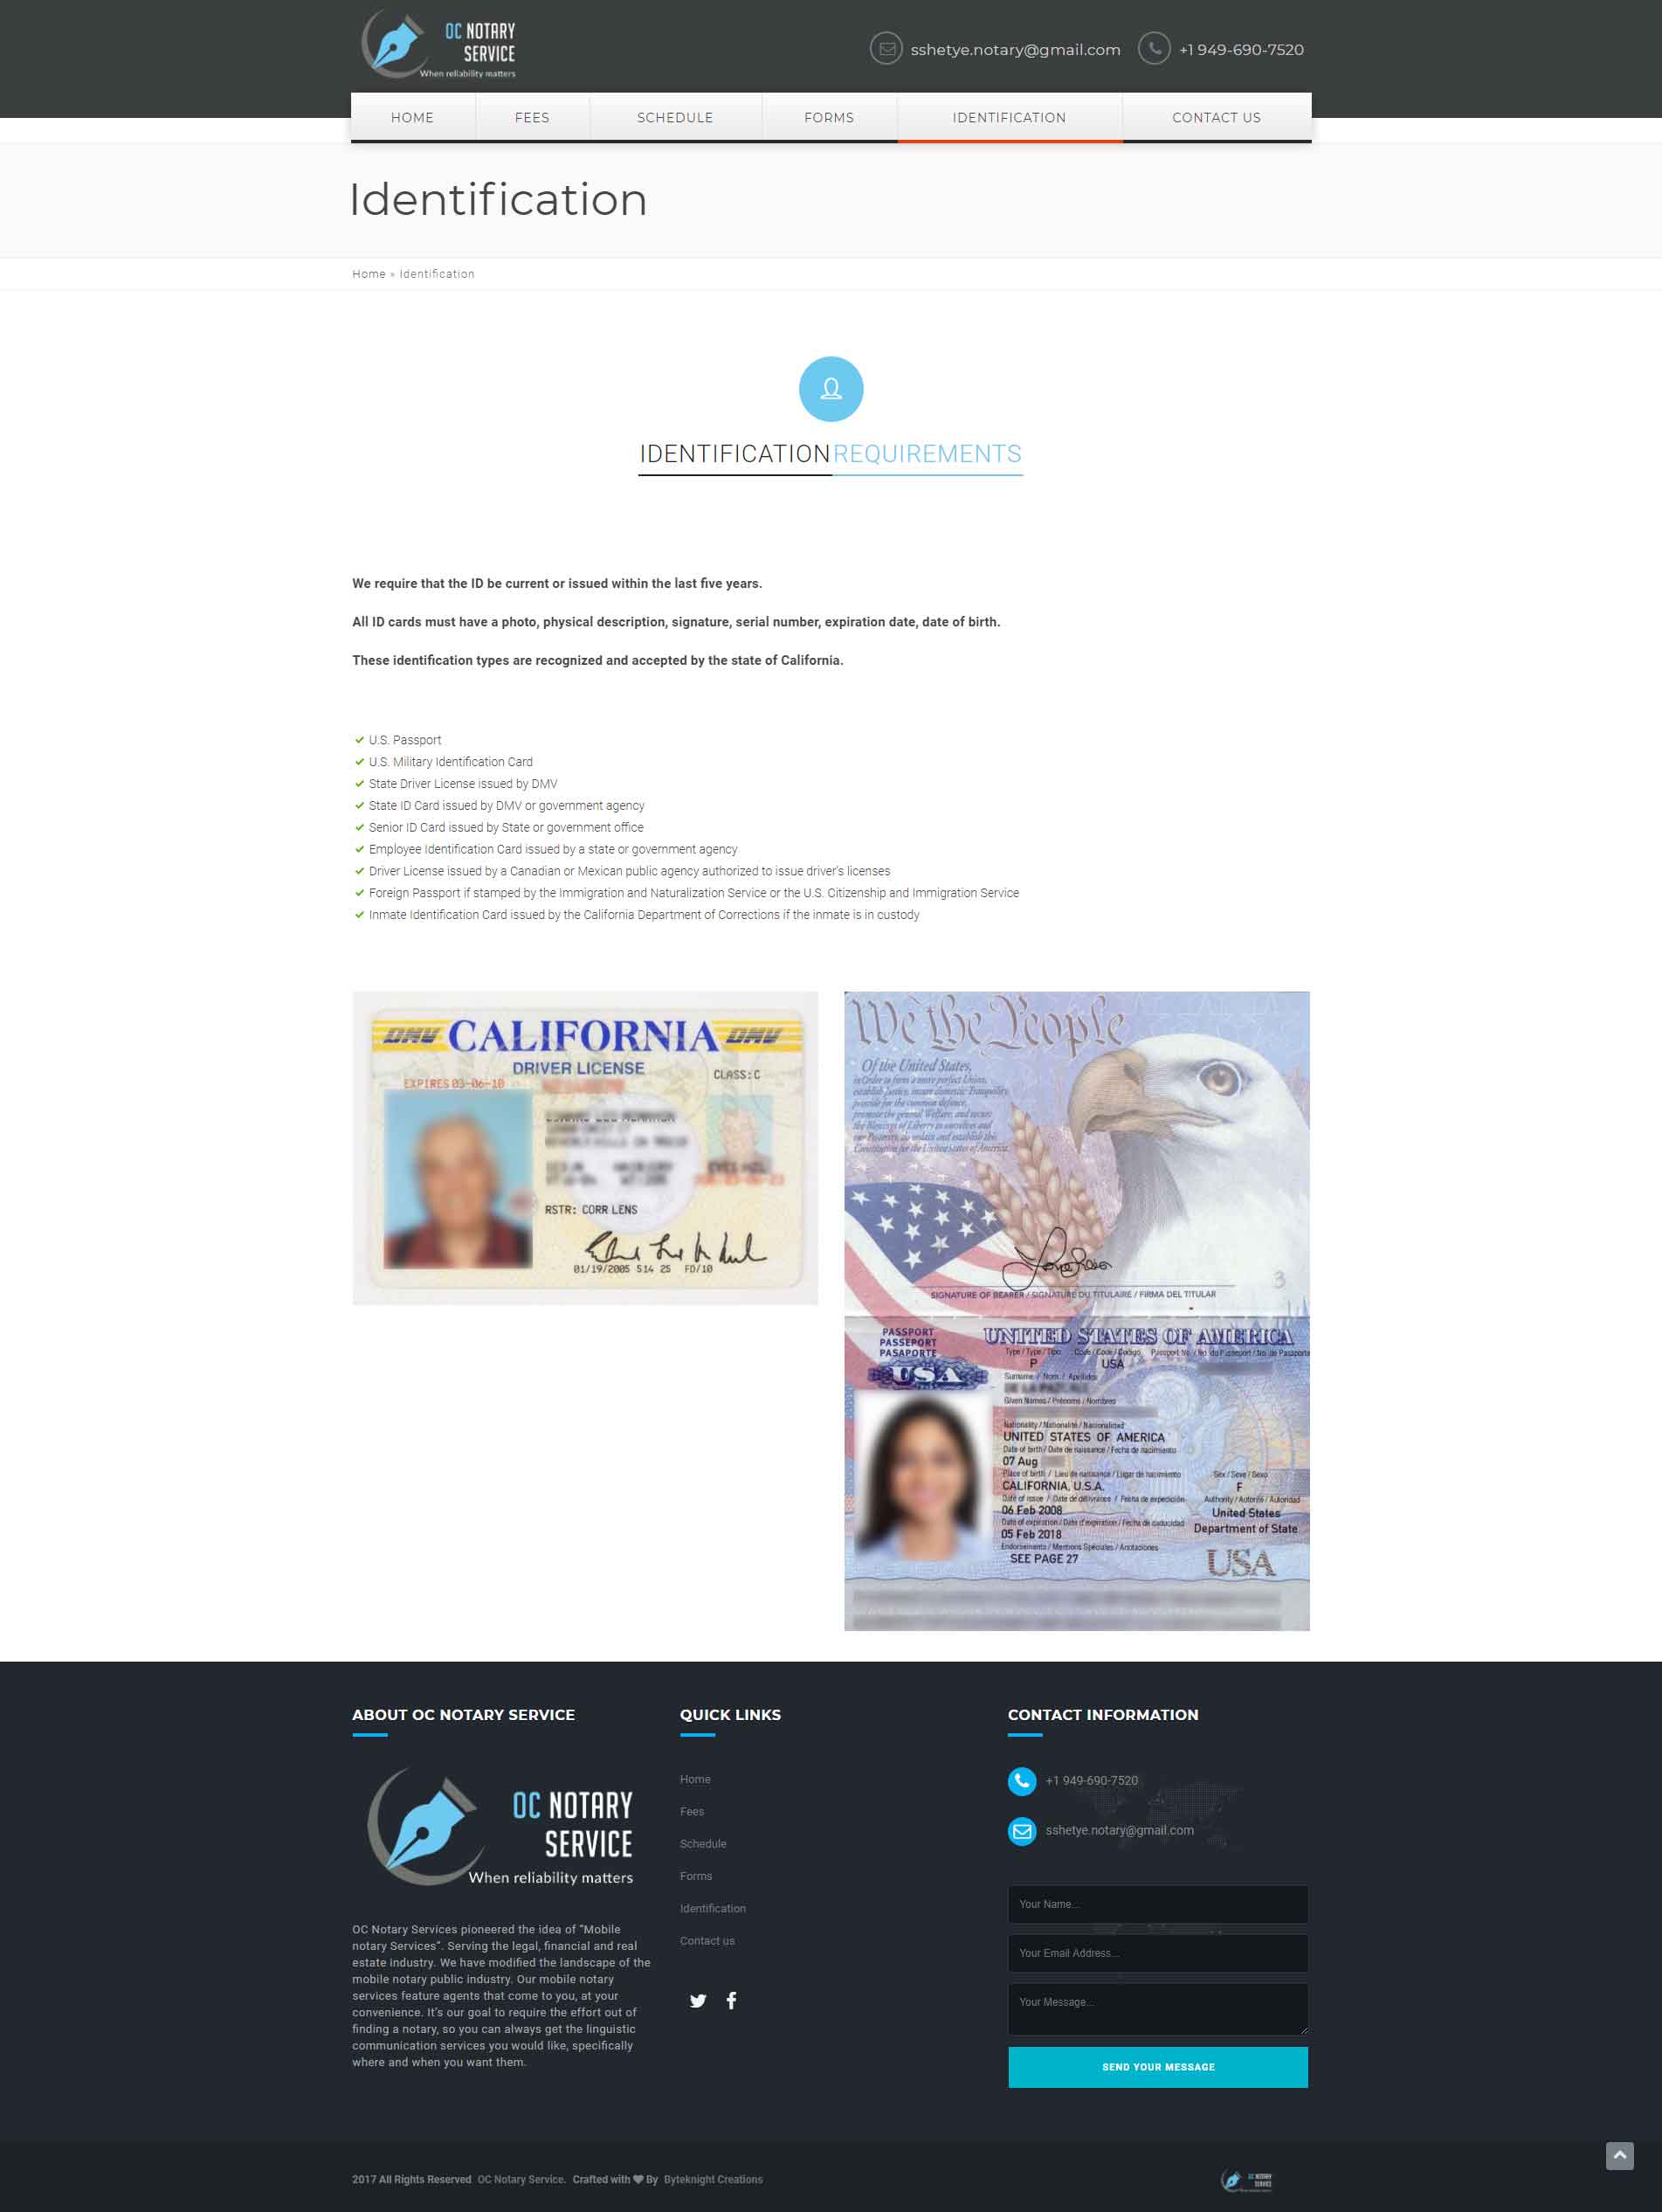 Notary Service Based Web Design and Development